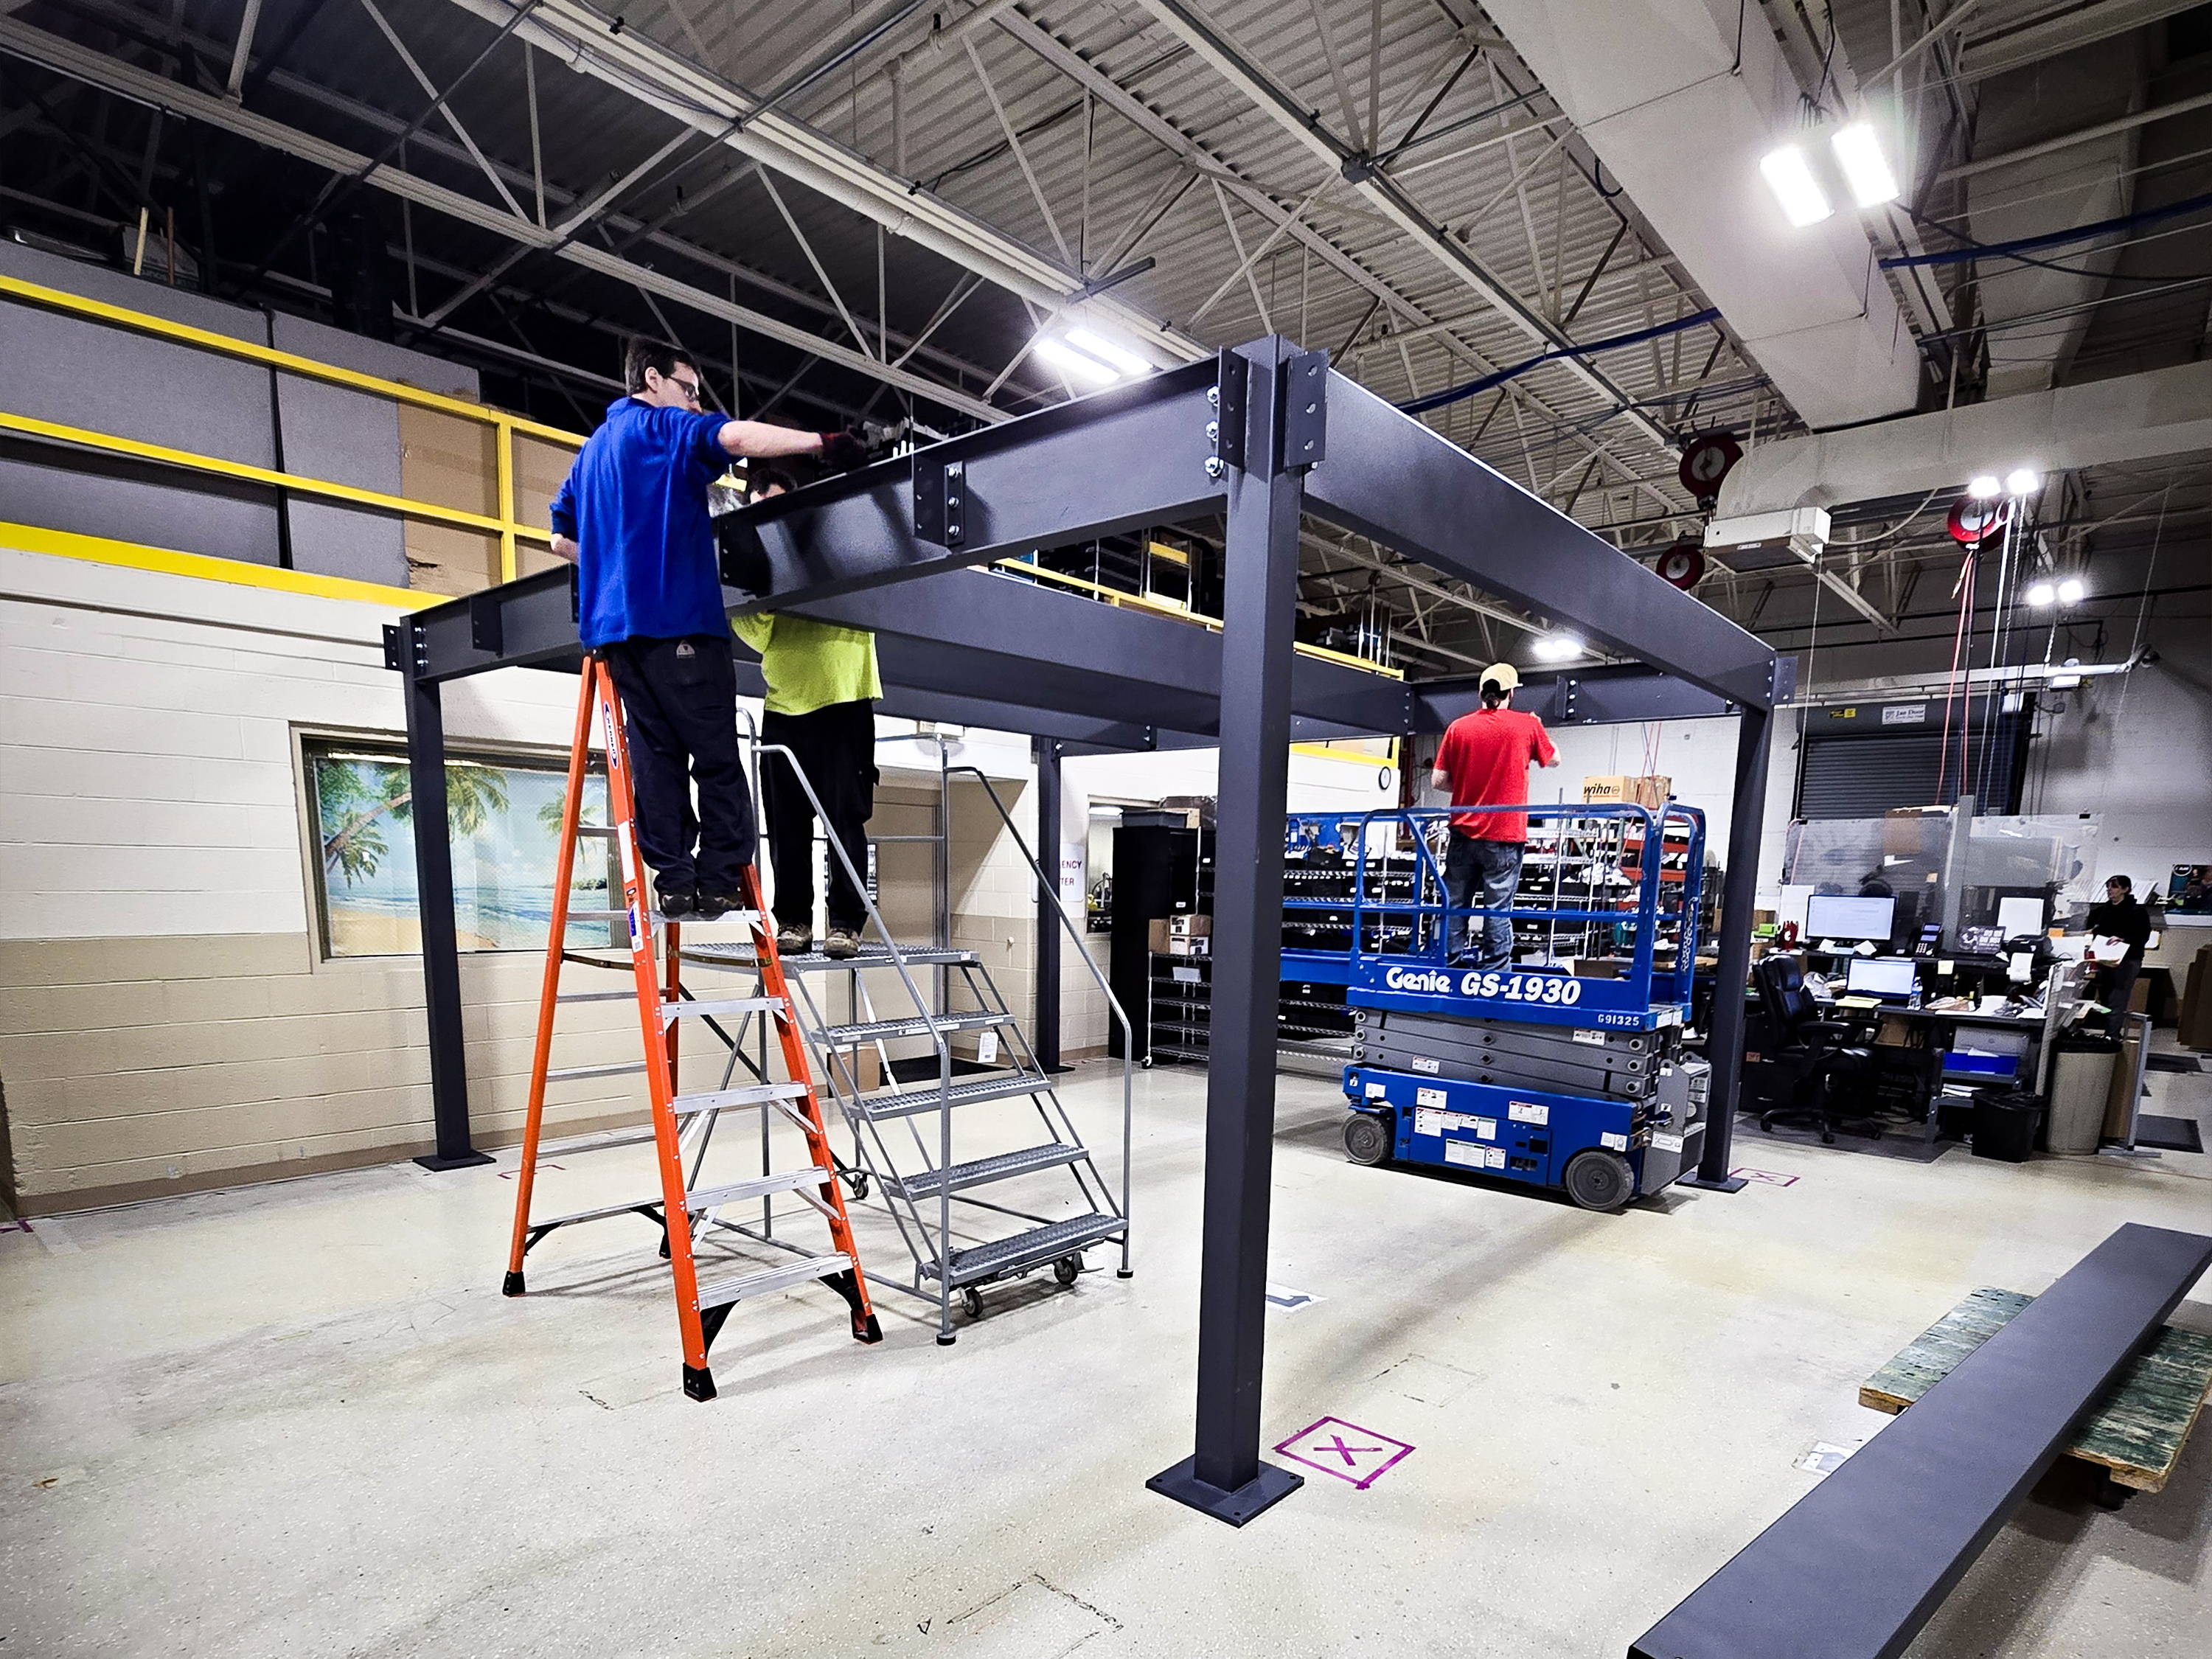 I-Beams being installed on mezzanine at College Park Industries by The Safety Source LLC.